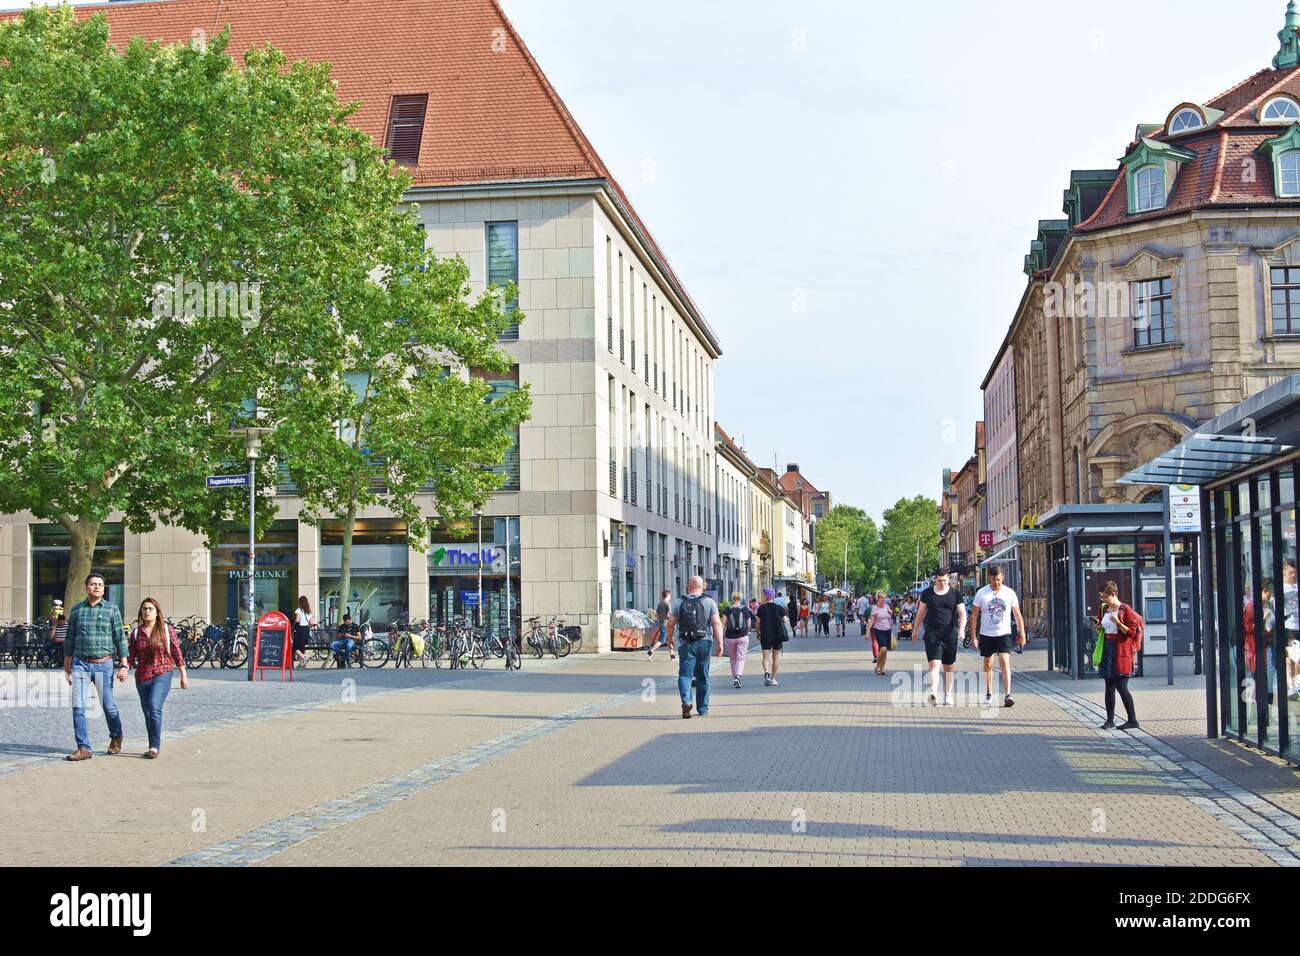 People walking along the street in the city center. Stock Photo